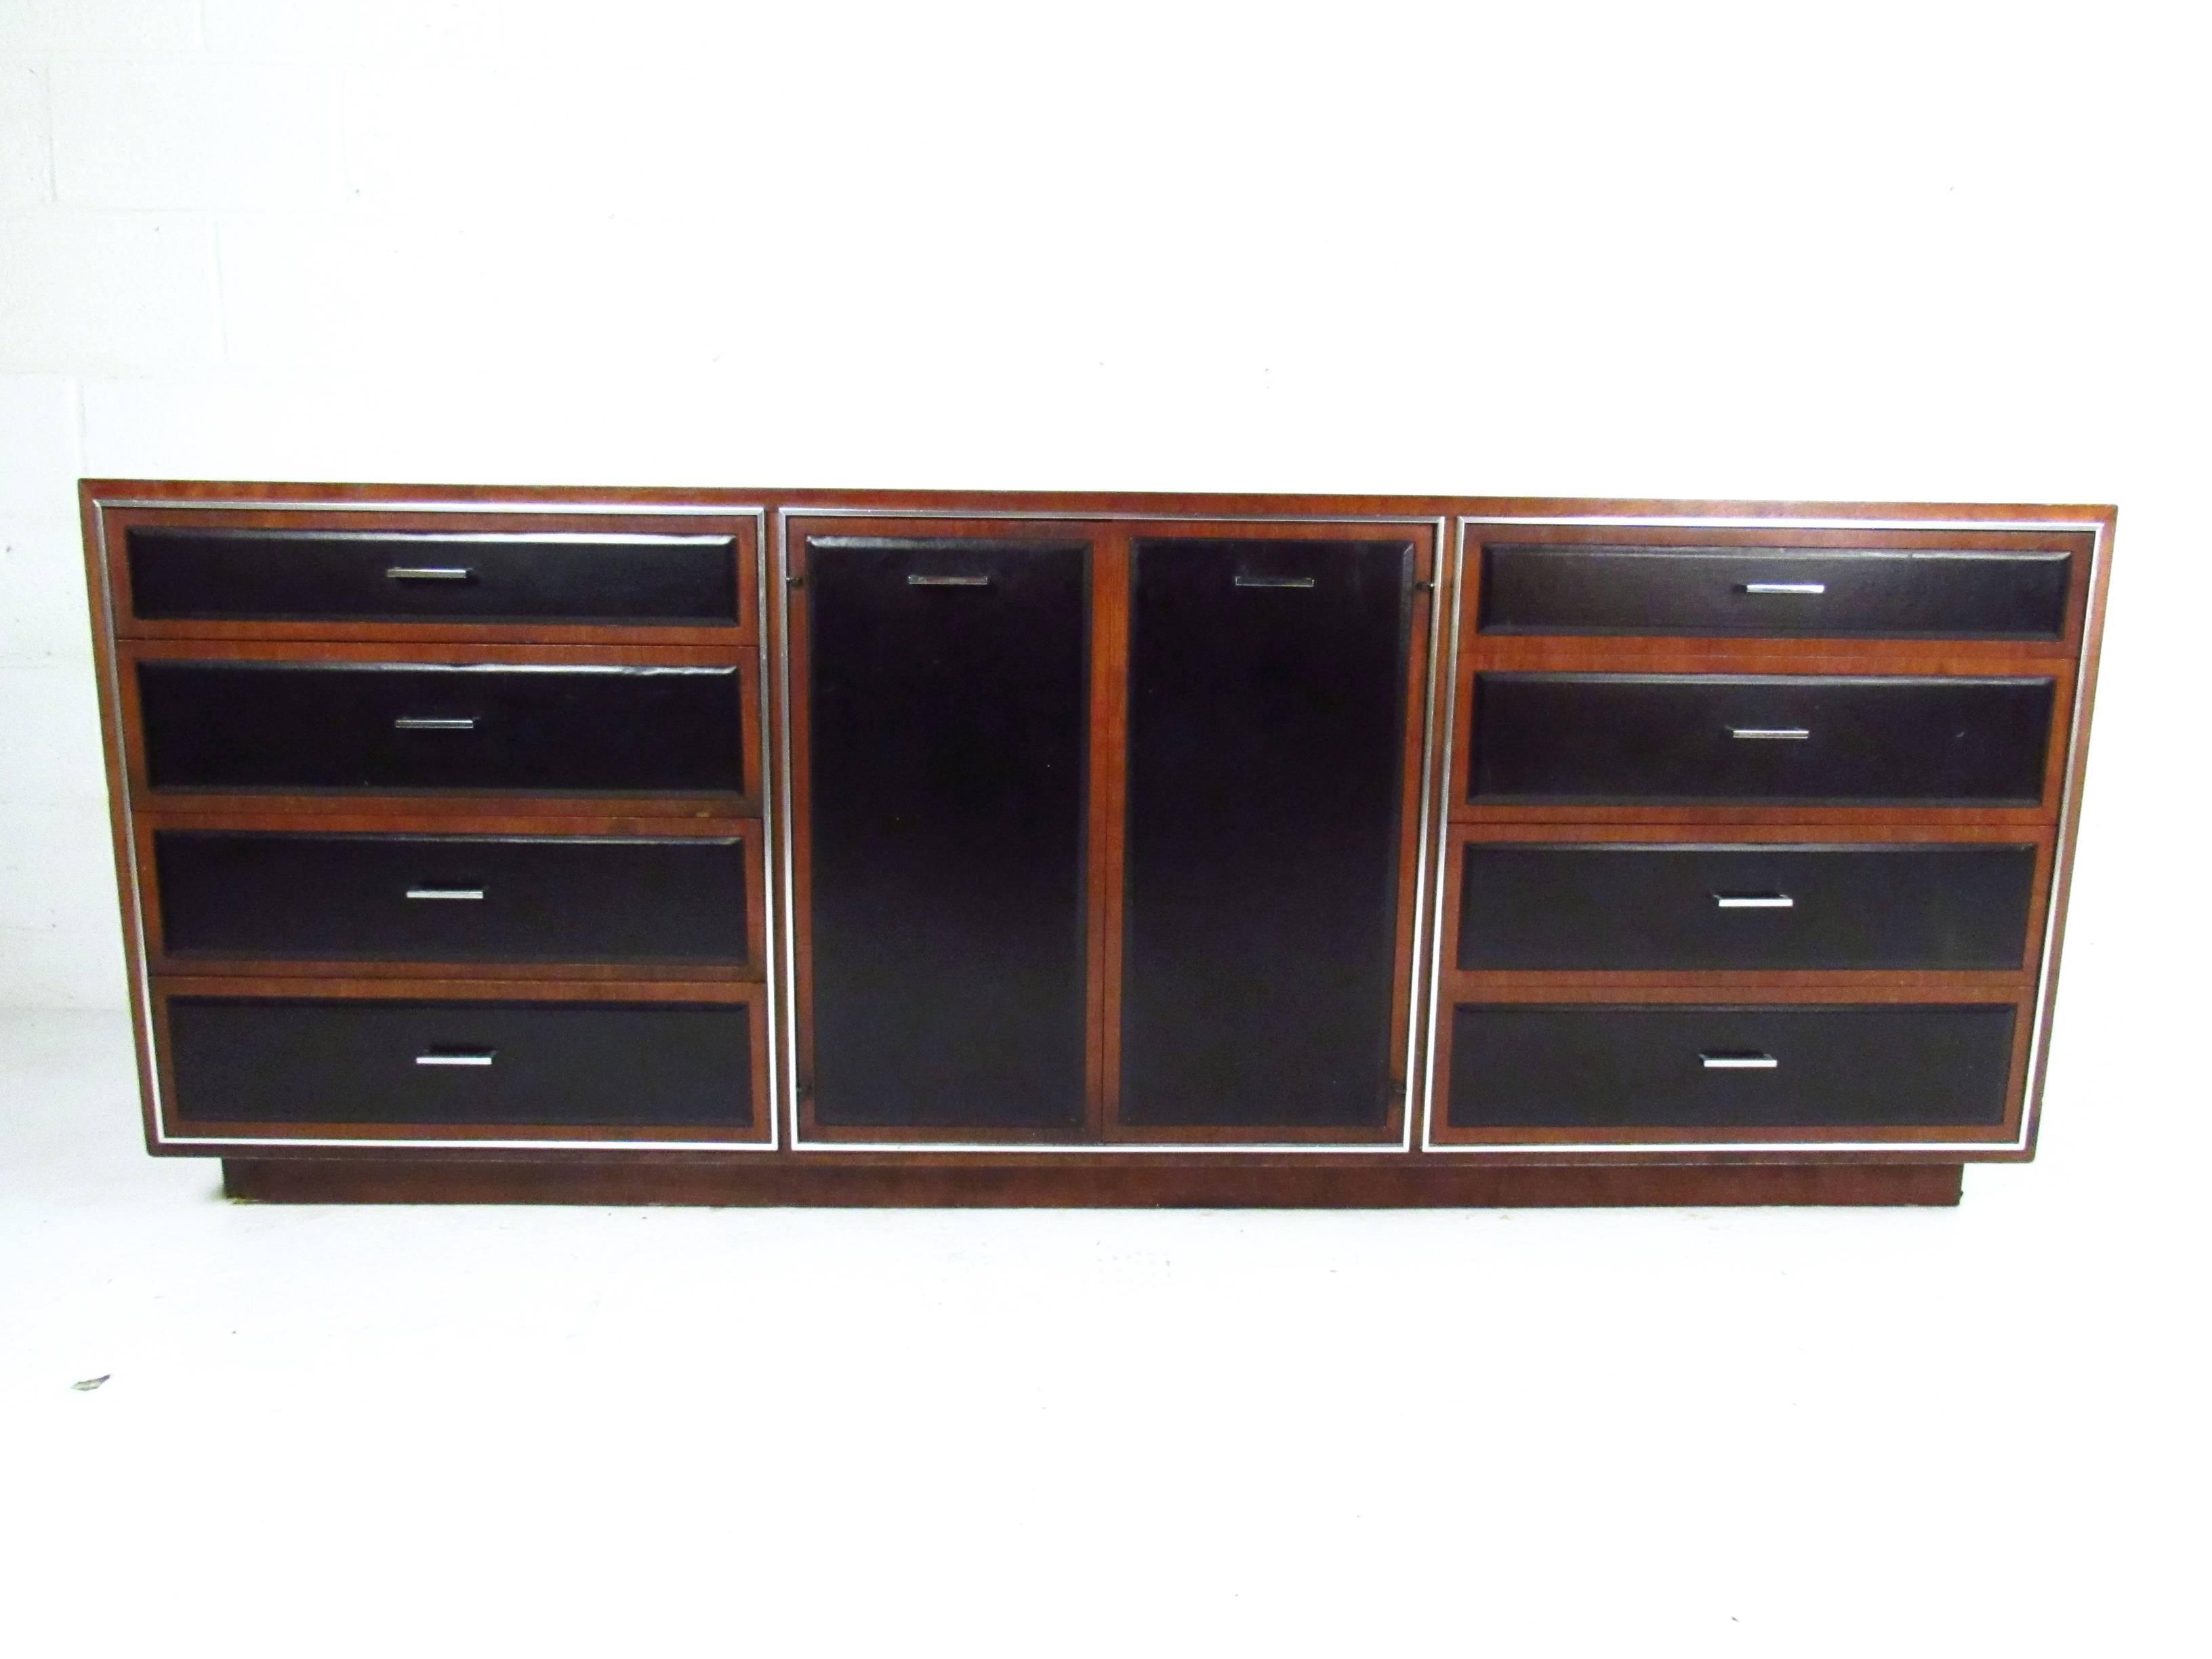 This beautiful server features exquisite leatherette paneled drawer fronts, chrome trim and pulls, and makes a stylish addition to any interior. This unique vintage design offers plenty of space for bedroom storage, and has a matching armoire and